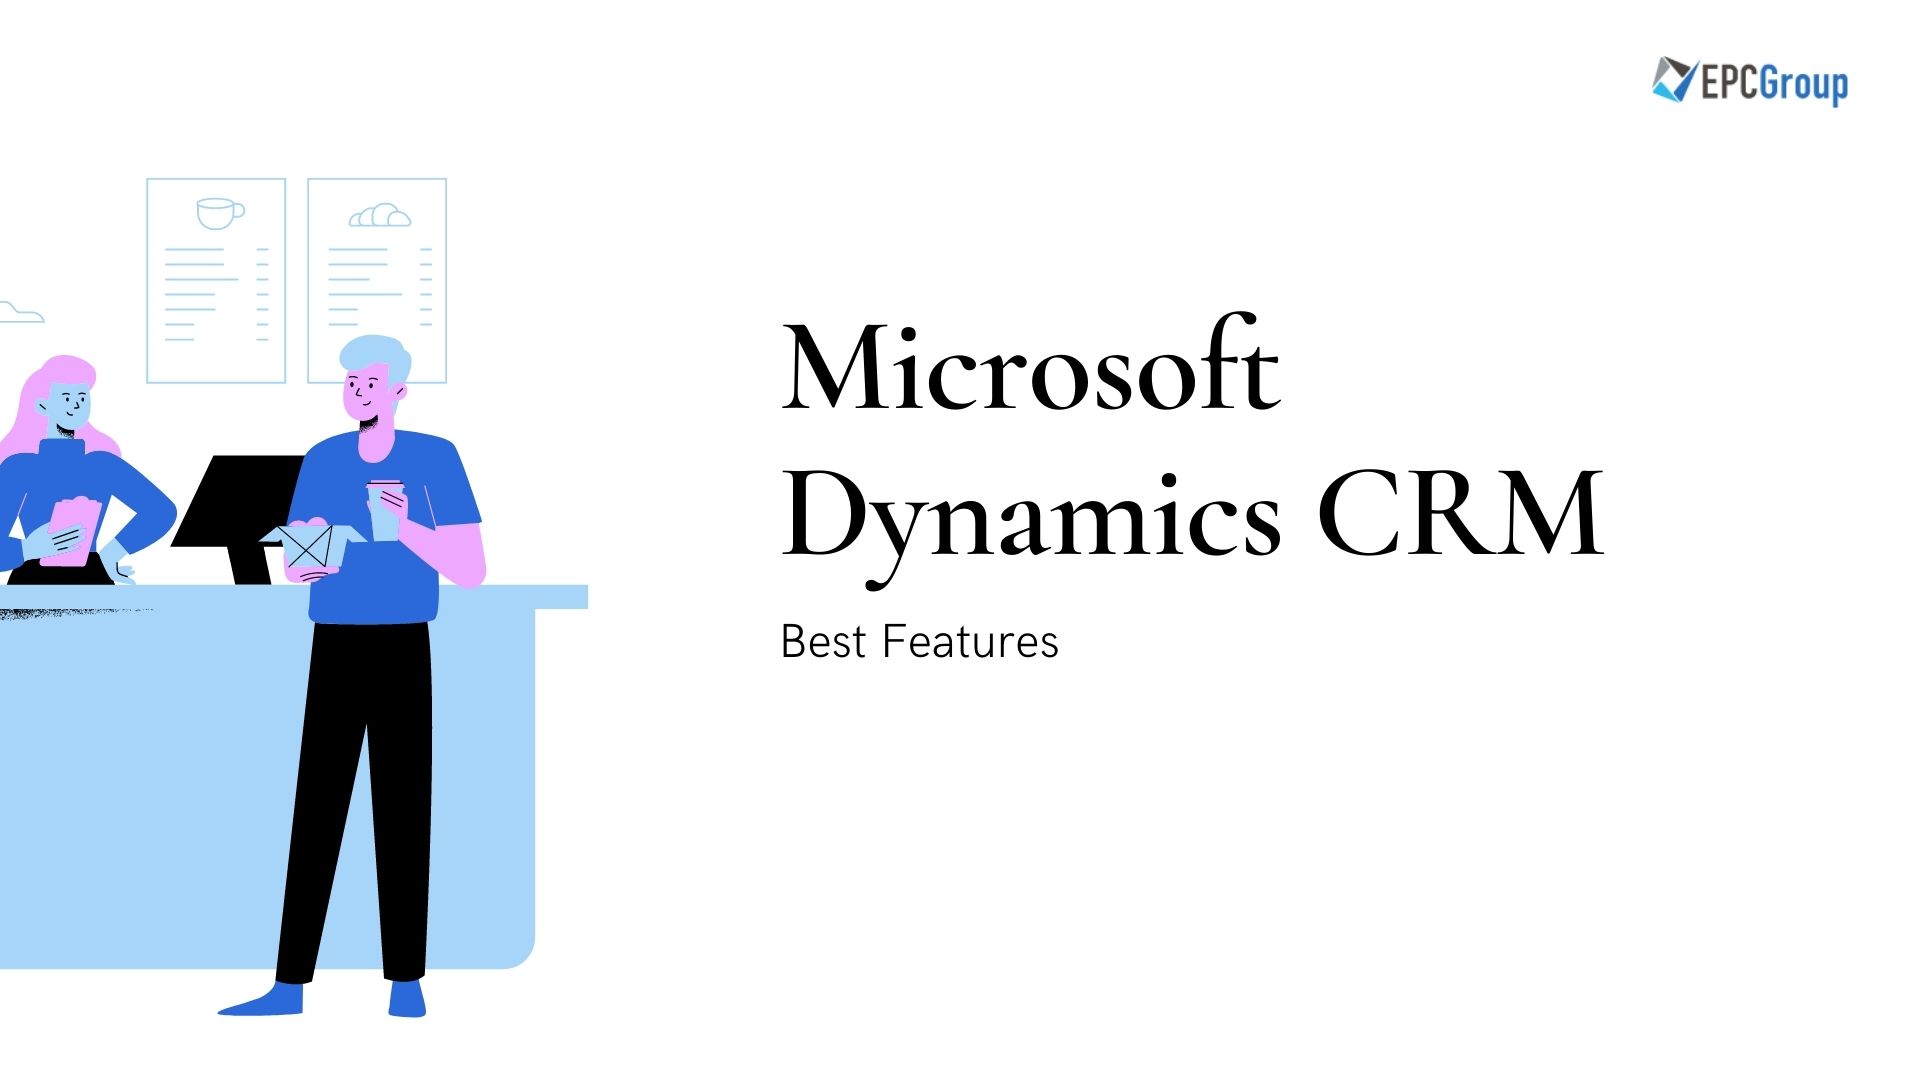 What Is The Best Feature Of Microsoft Dynamics CRM?